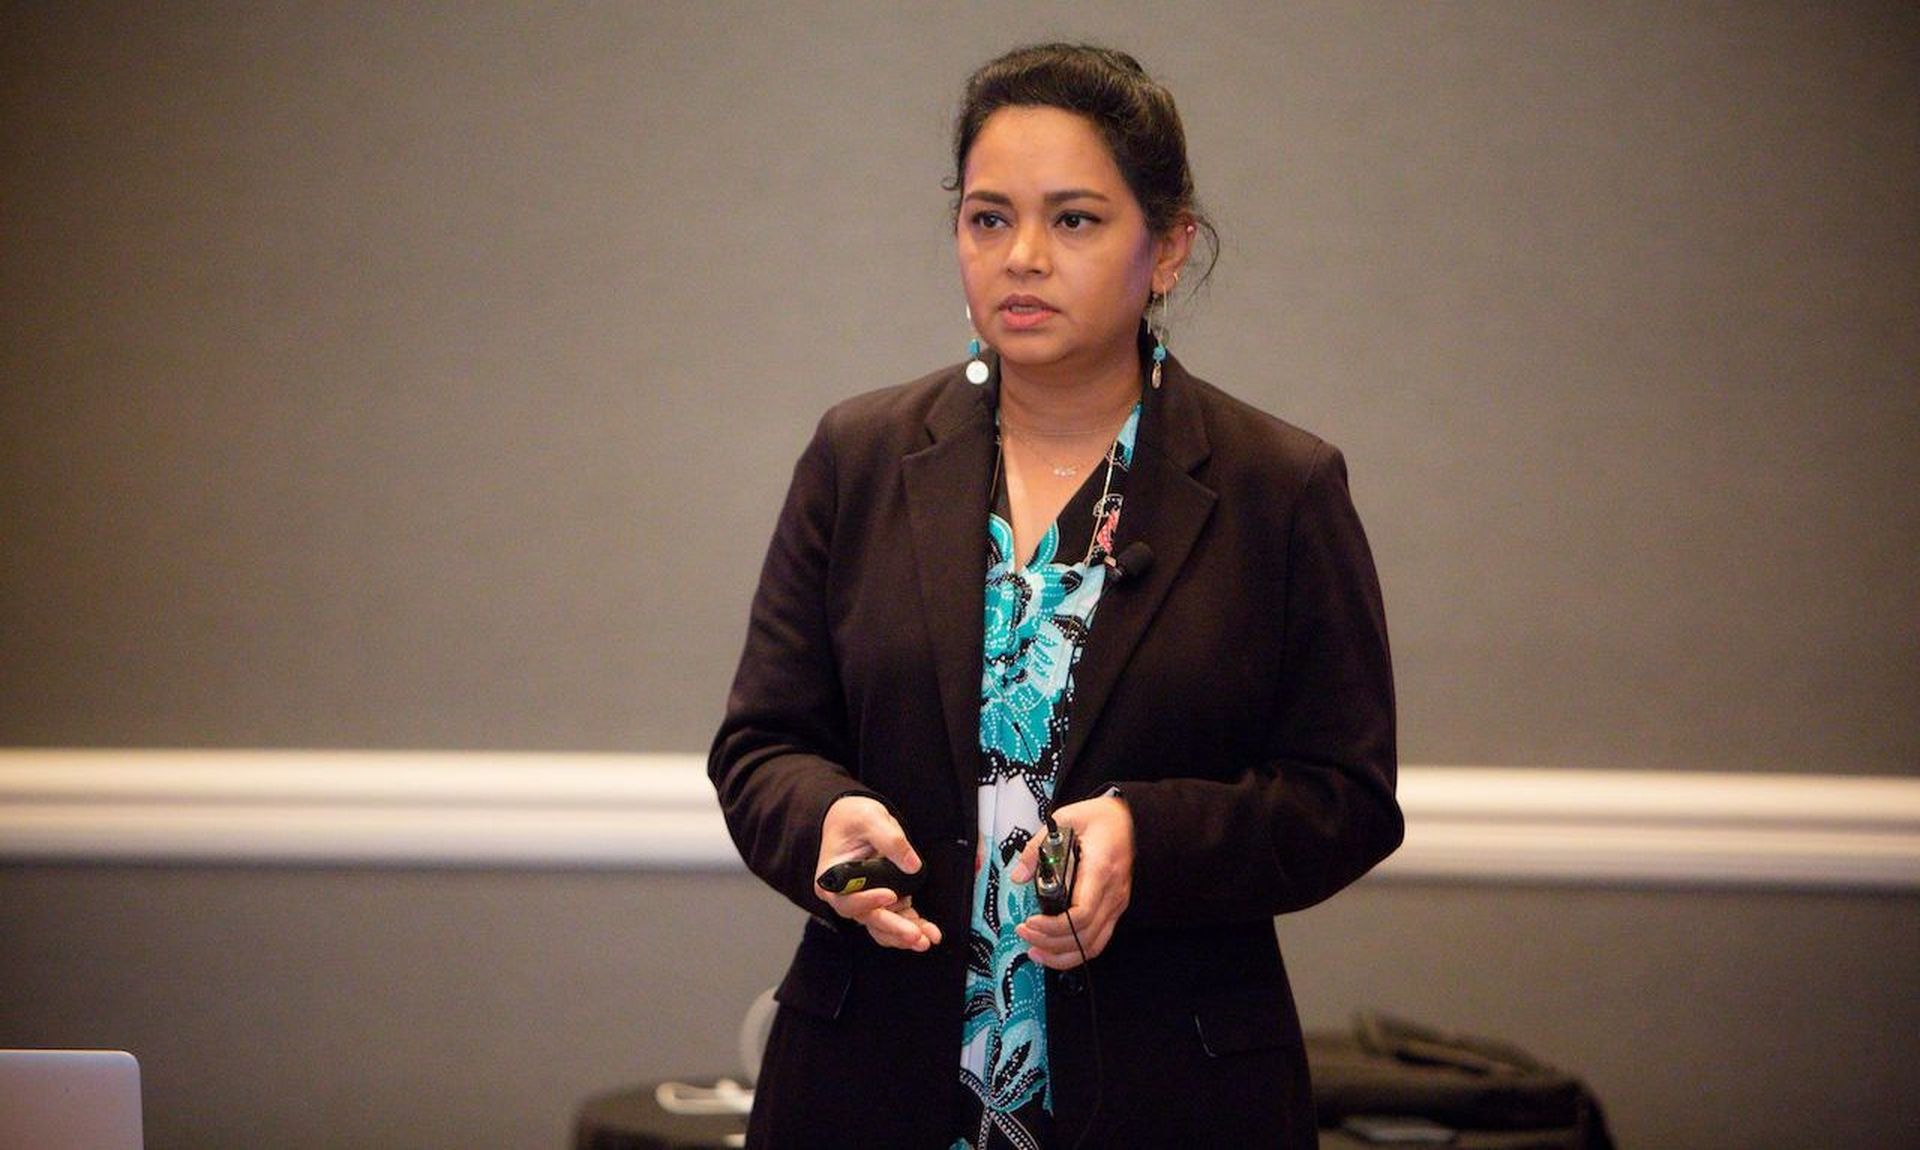 Poornima Debolle co-founded Menlo Security in 2013, two years after her prior startup, Altor Networks, got bought by Juniper Networks. (Menlo Security)